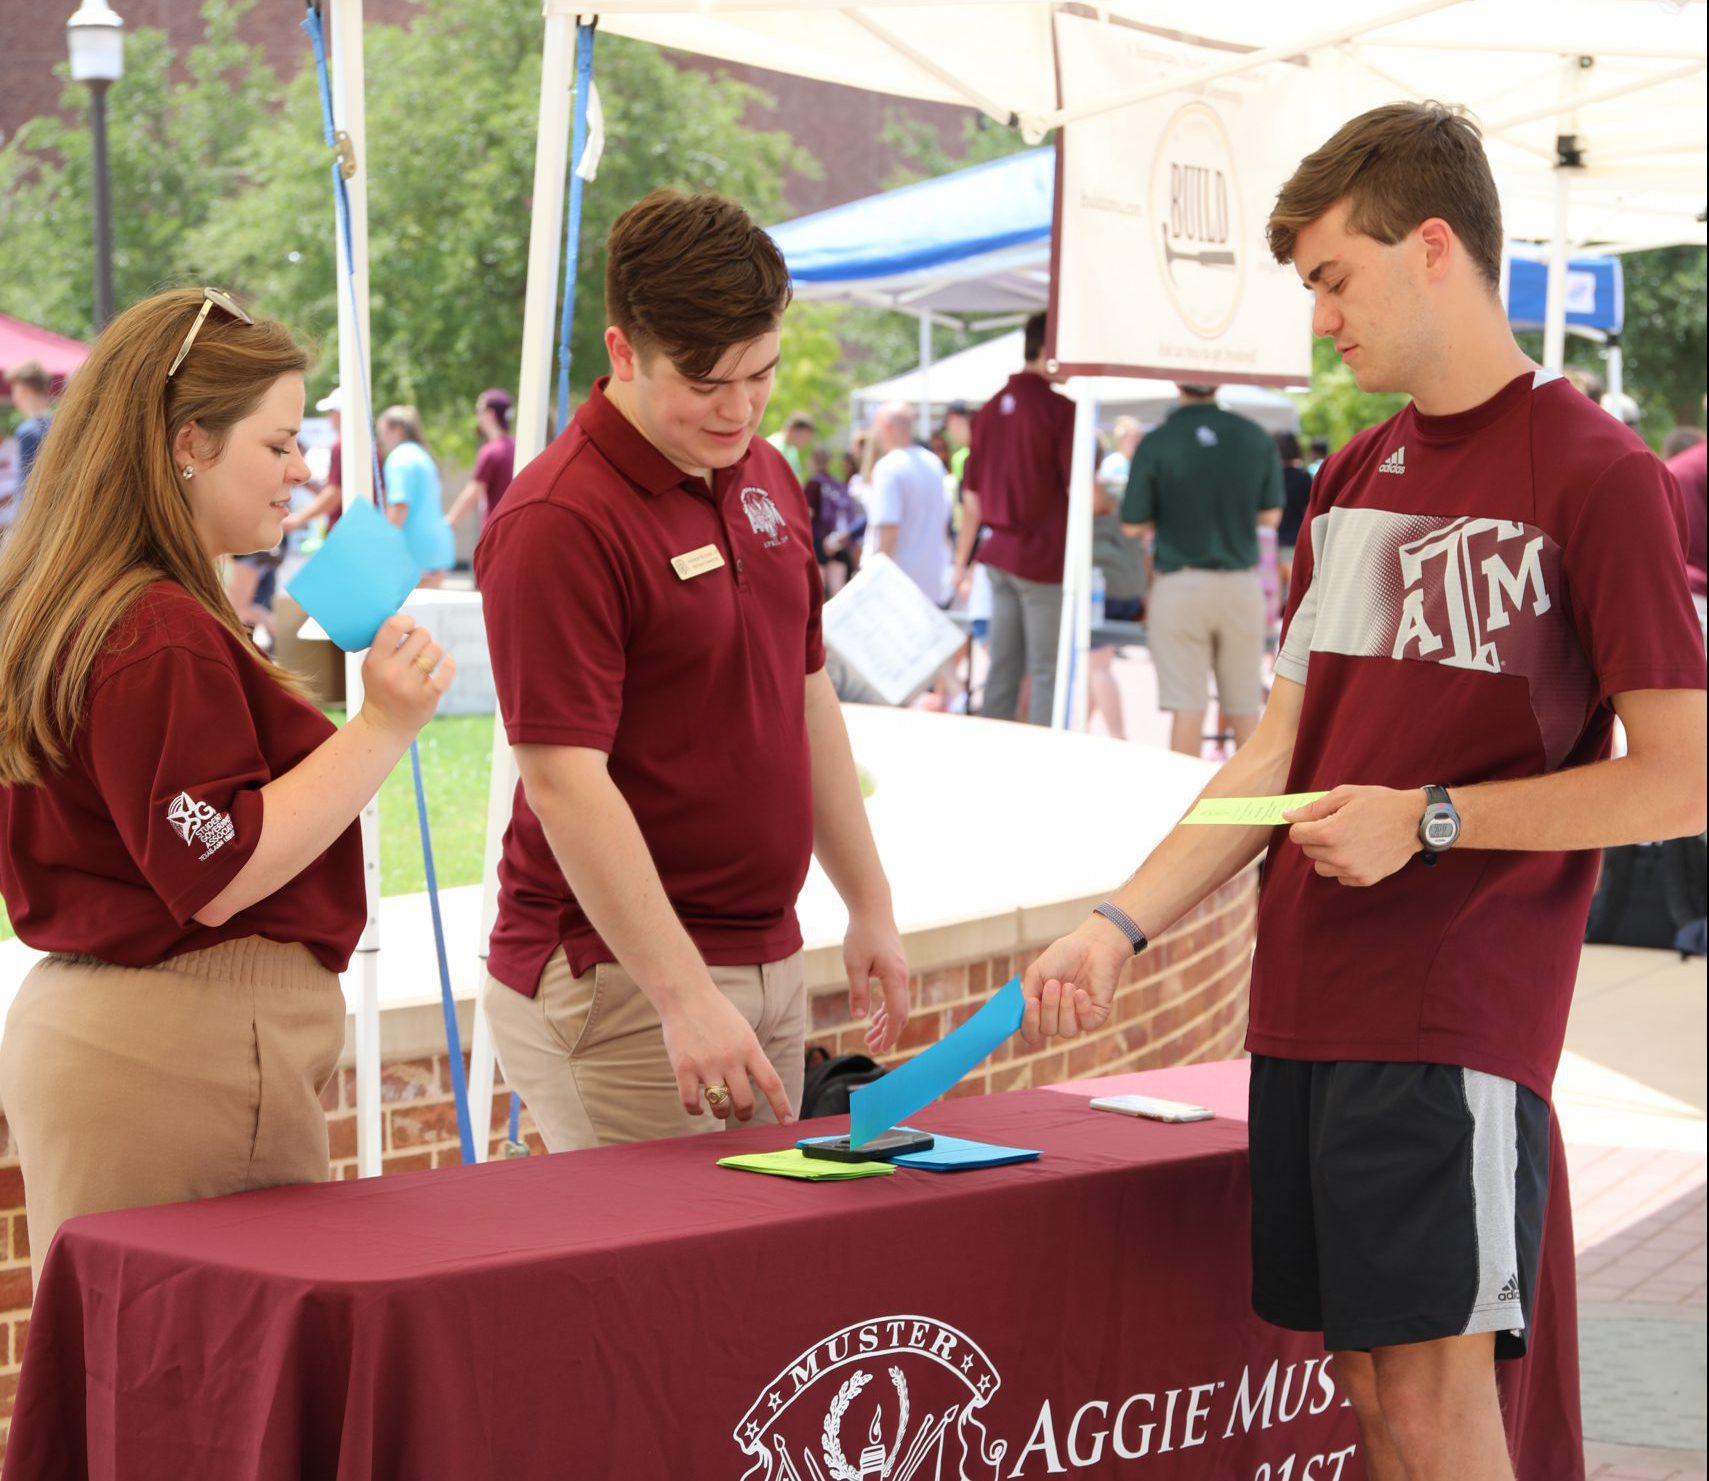 Image of Student in front of a student organization booth